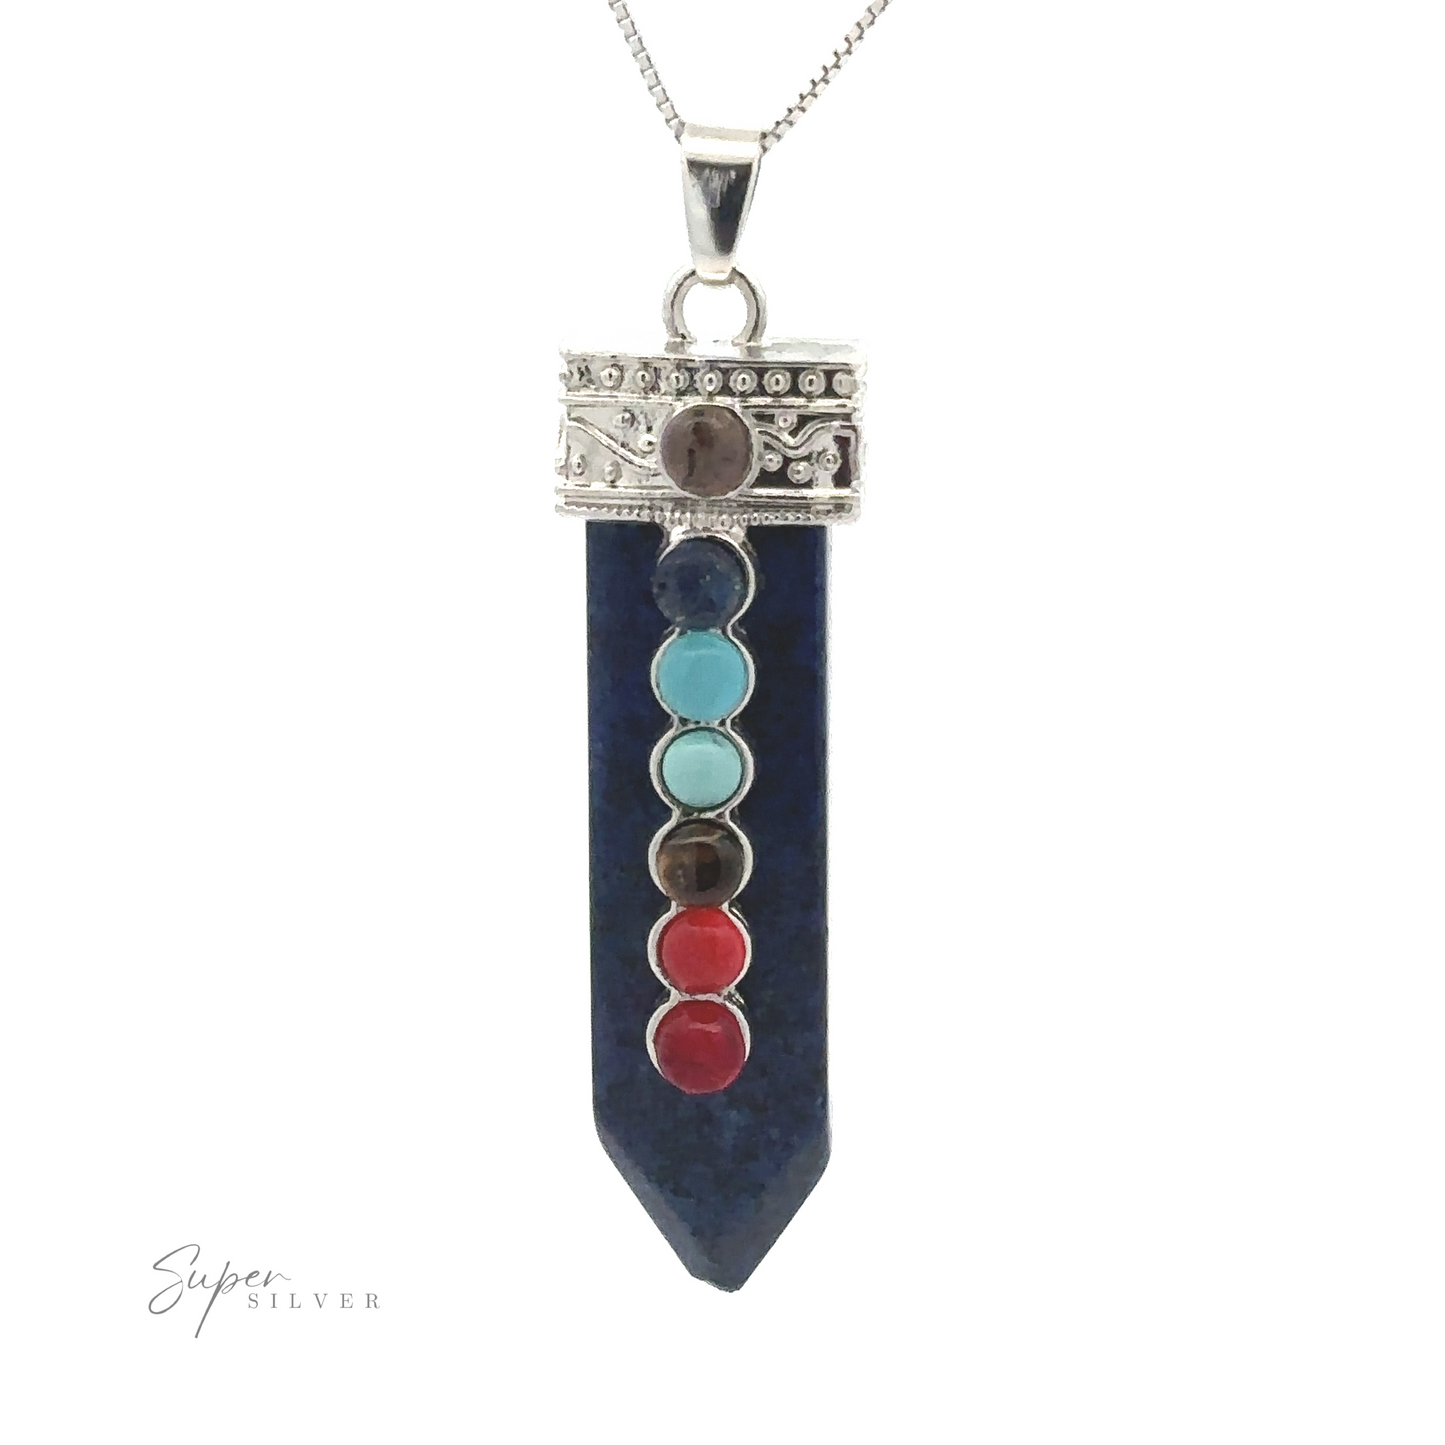 
                  
                    Obelisk Crystal Pendant with Small Chakra Stones adorned with seven Chakra stones and intricate silver-plated detailing at the top. The chain is a delicate silver link. Logo in bottom left corner reads "Super Silver.
                  
                